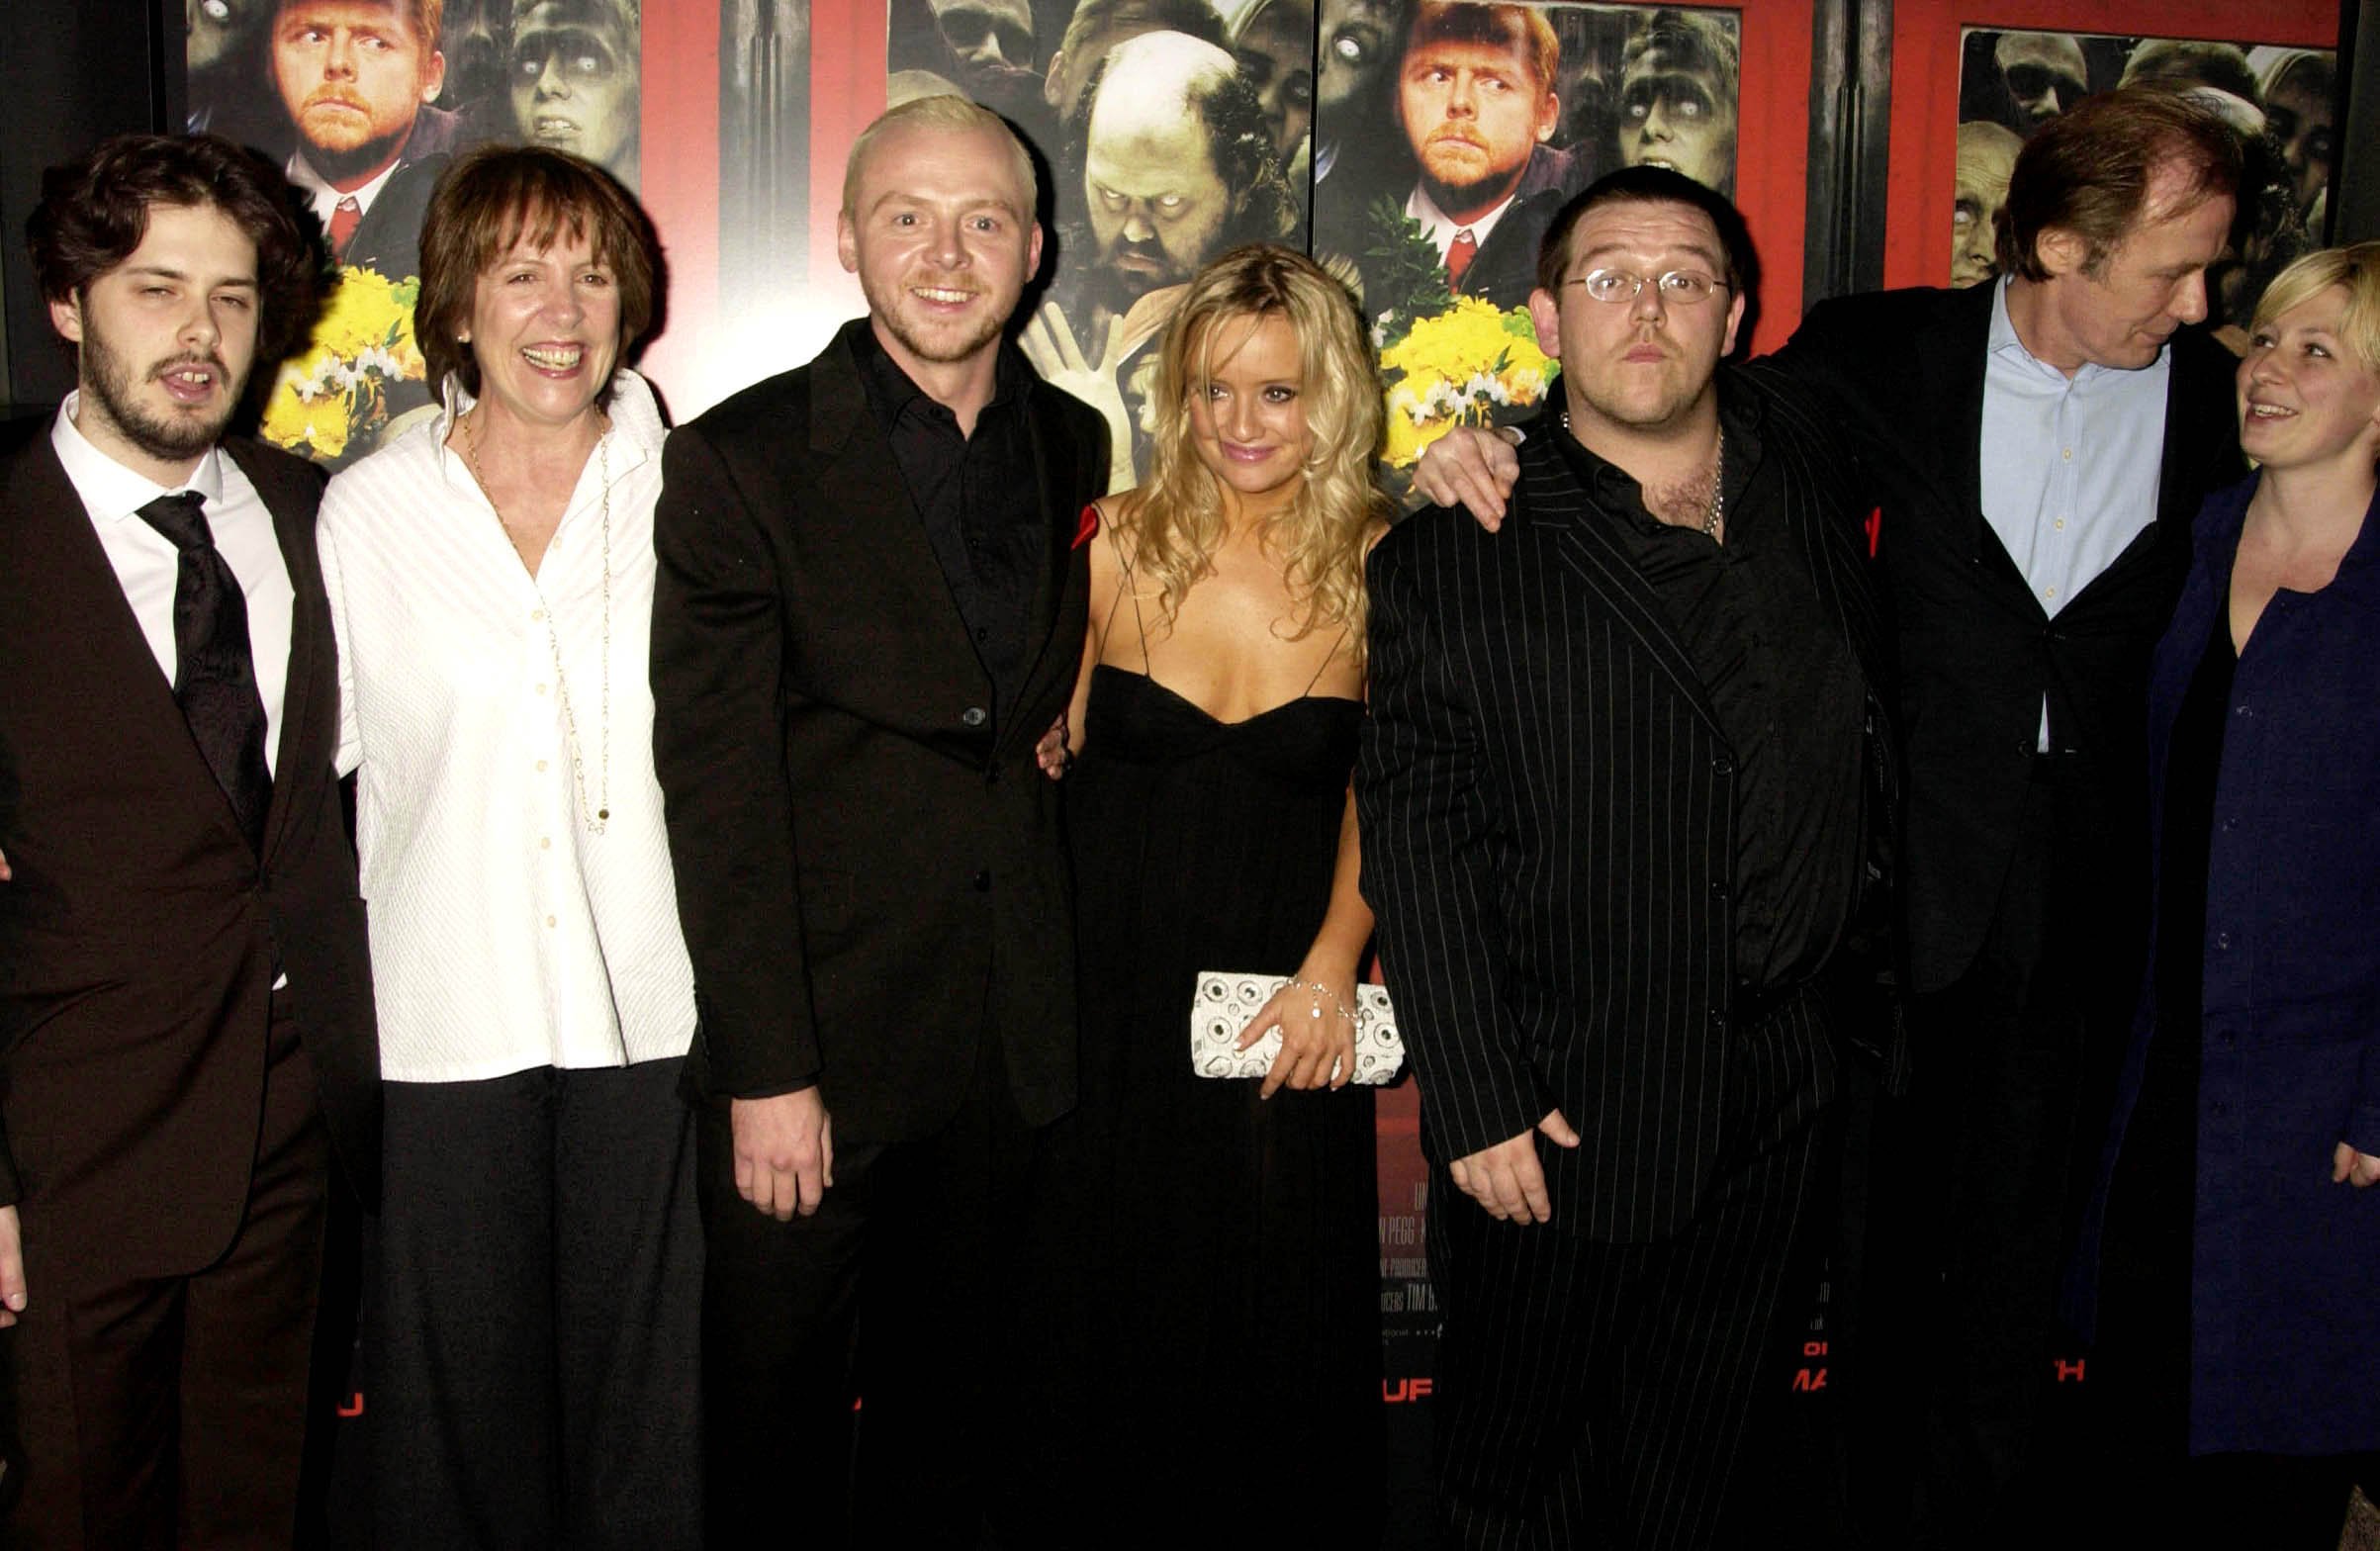 Zombie movie Shaun of the Dead cast get together for a photo at the premiere